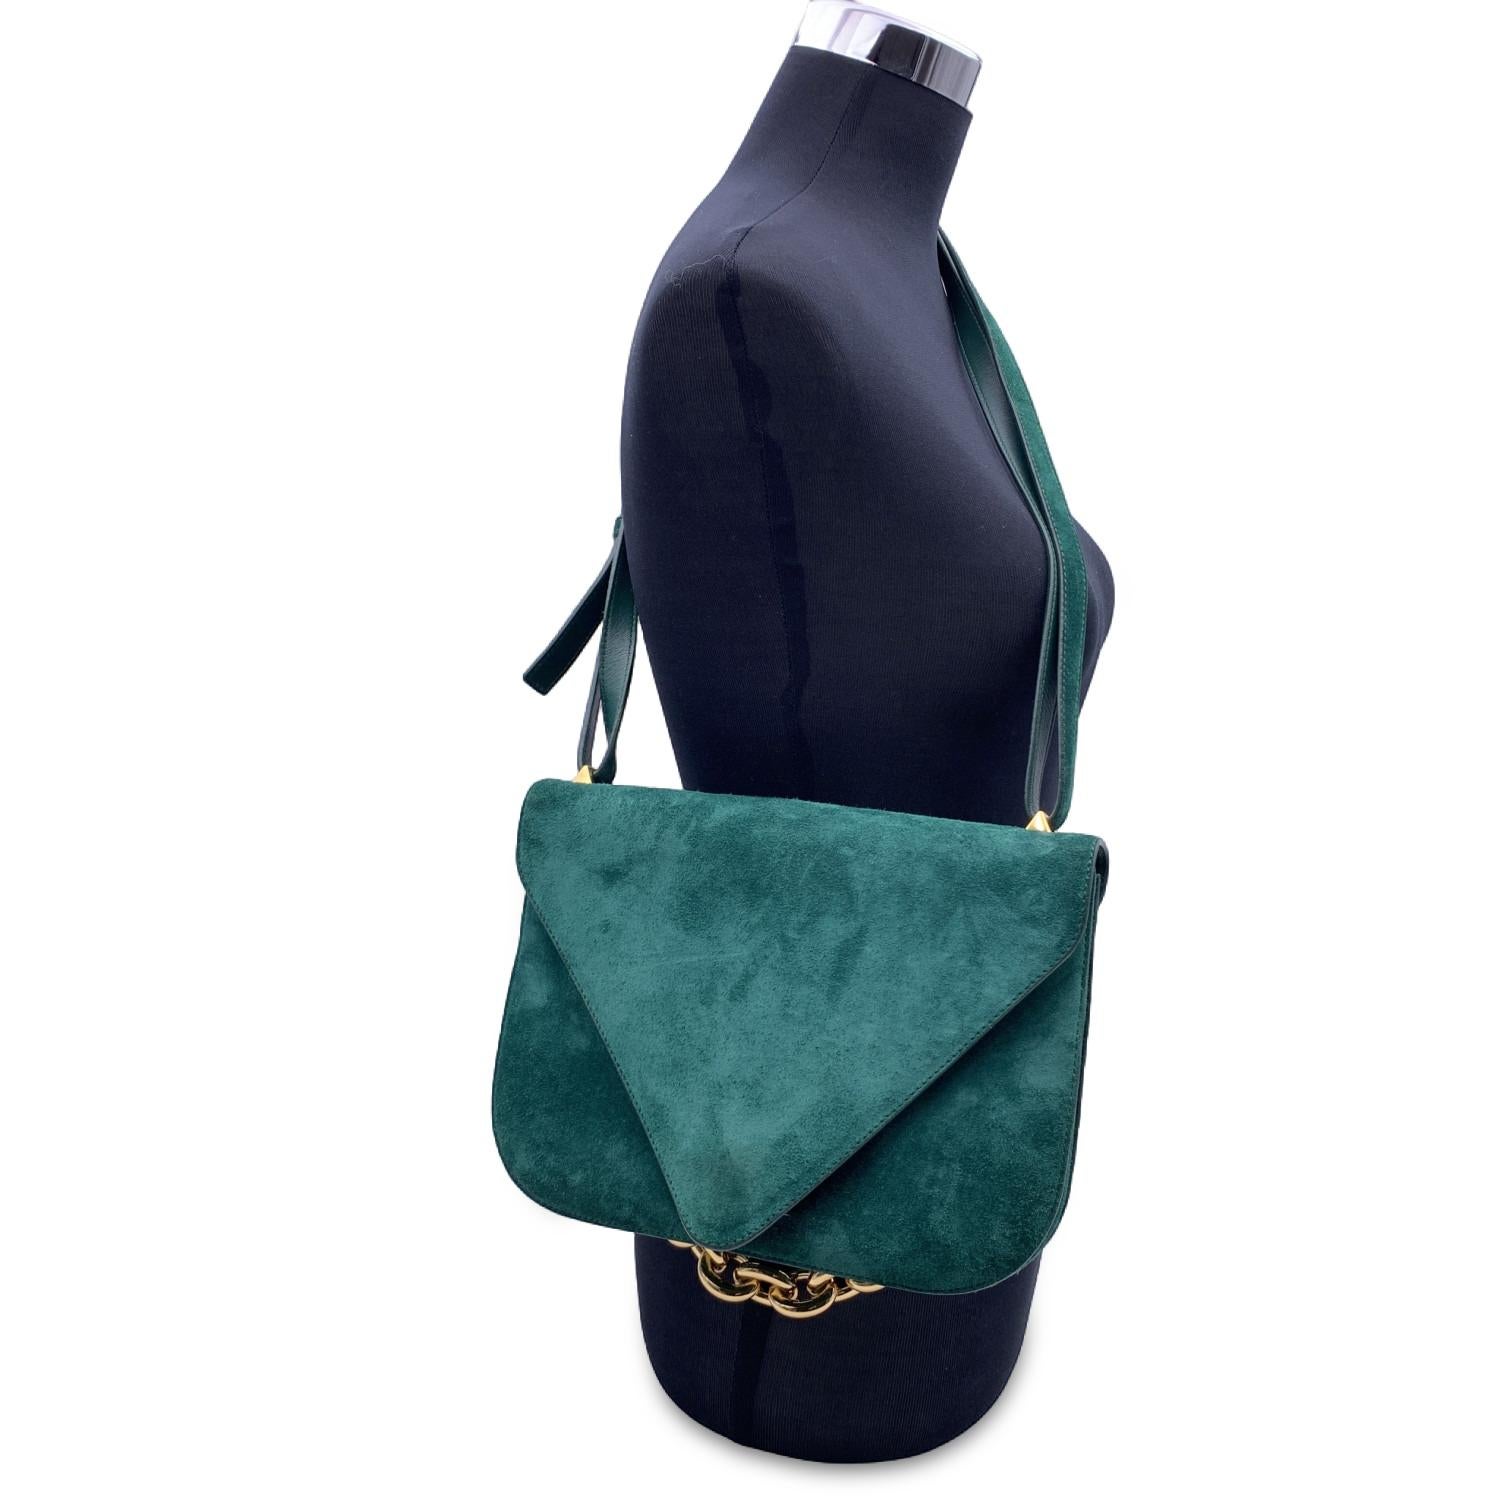 Bottega Veneta 'Mount - Medium' shoulder bag crafted in green suede. The model features a chunky gold-tone chain strap, an adjustable / removable shoulder strap, a magnetic closure on flap. Green leather interior. I features 2 main compartments and1